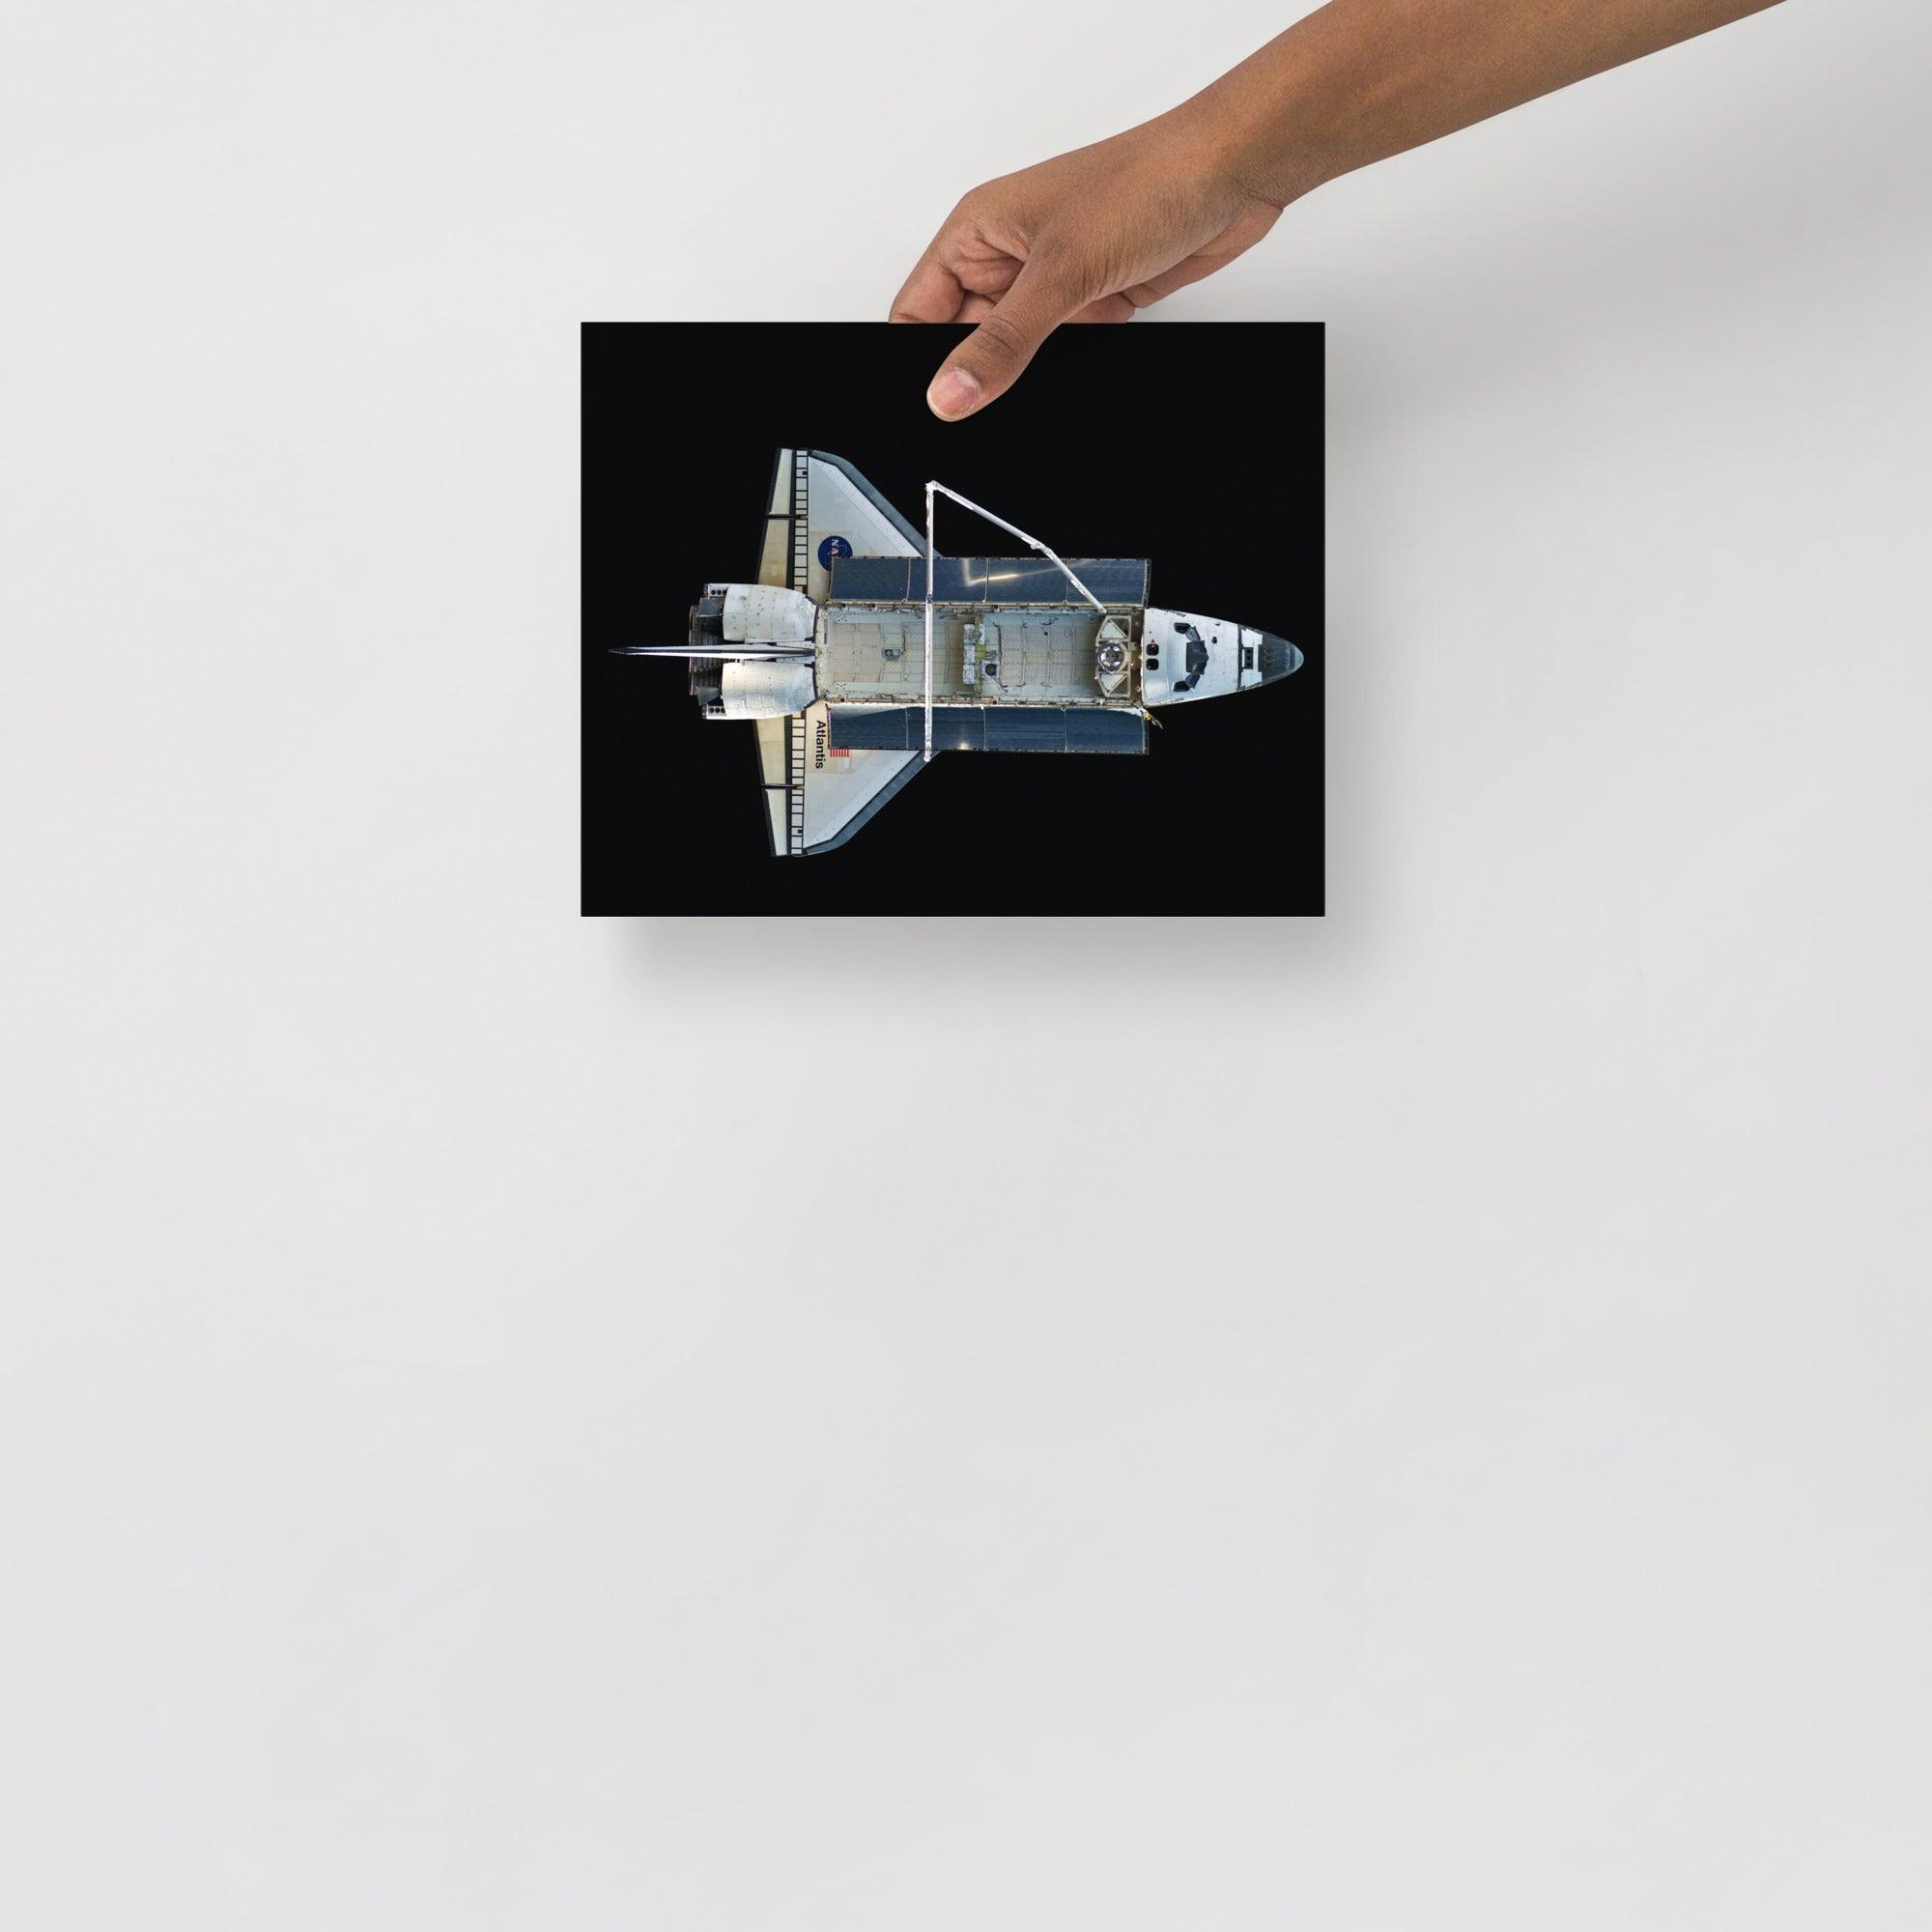 A Space Shuttle Atlantis poster on a plain backdrop in size 8x10”.